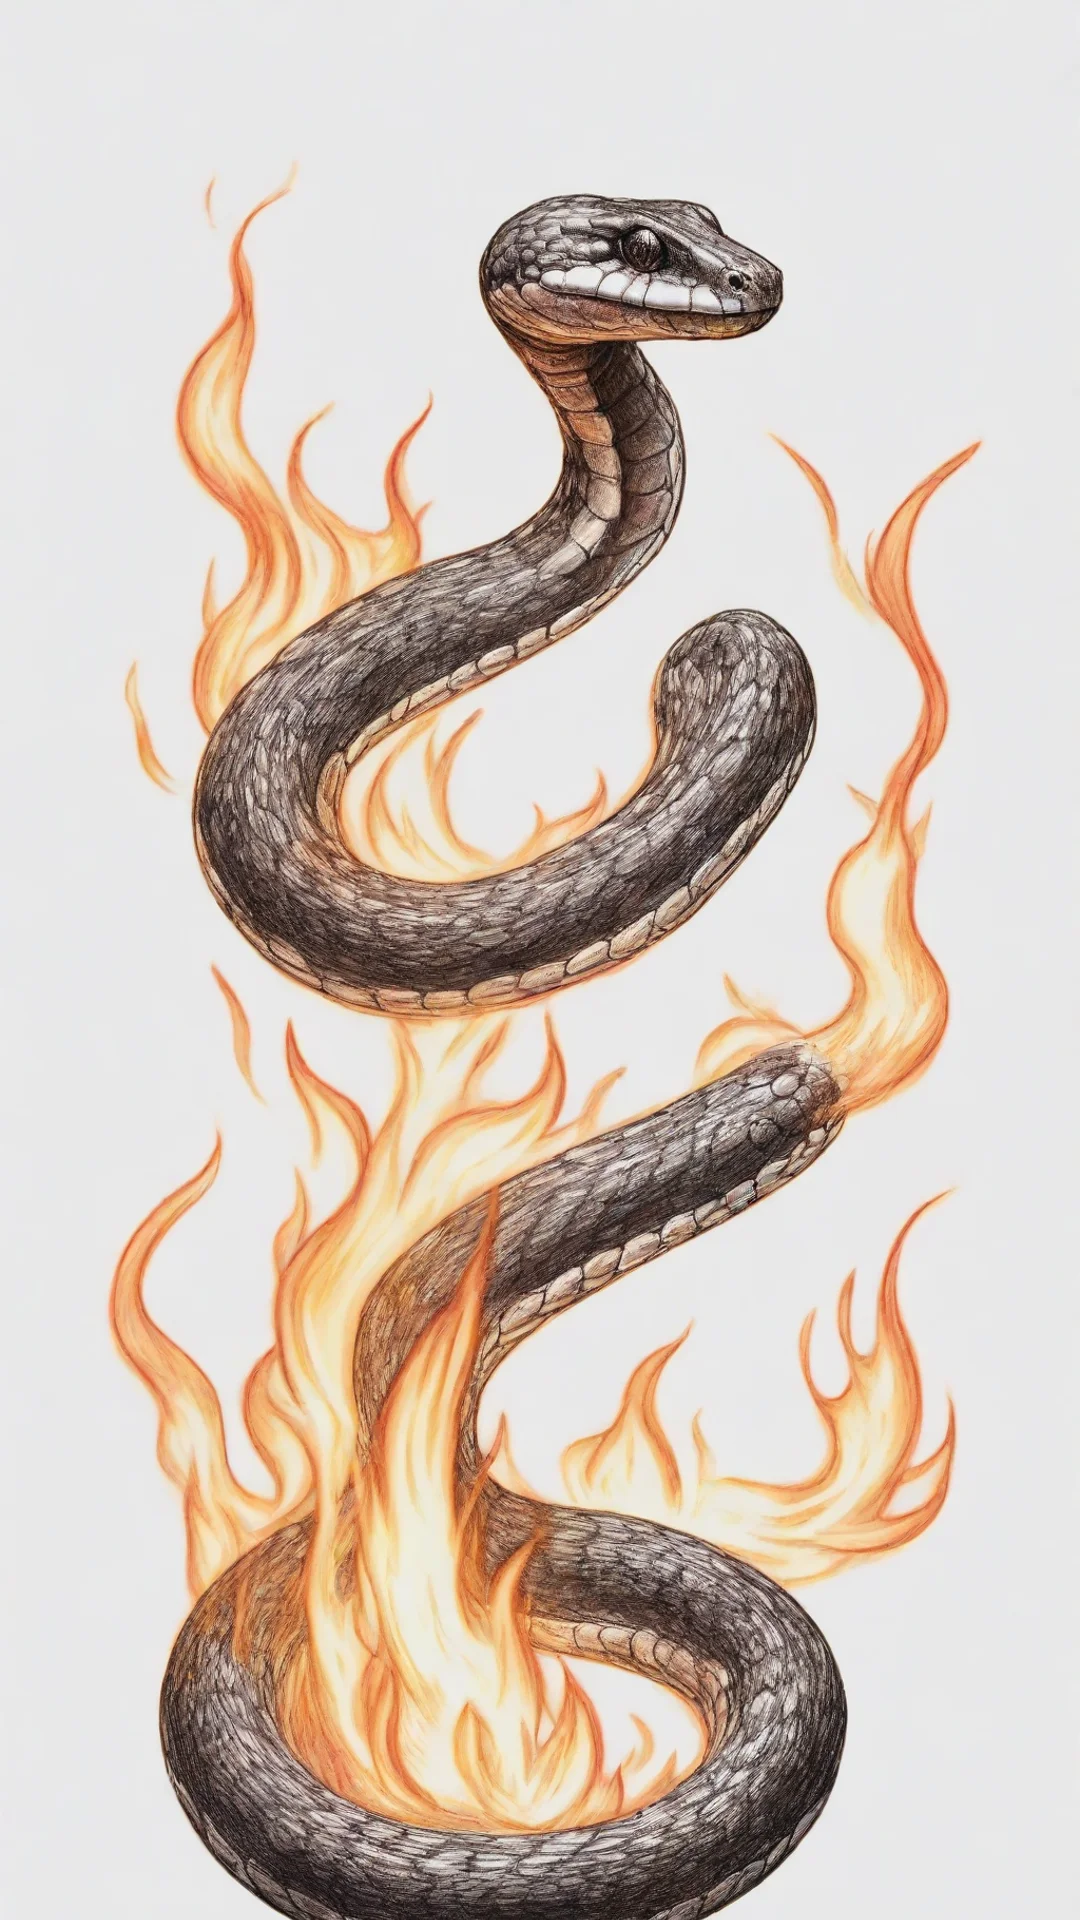 aiartstation art a sketched line art snake on fire confident engaging wow 3 tall